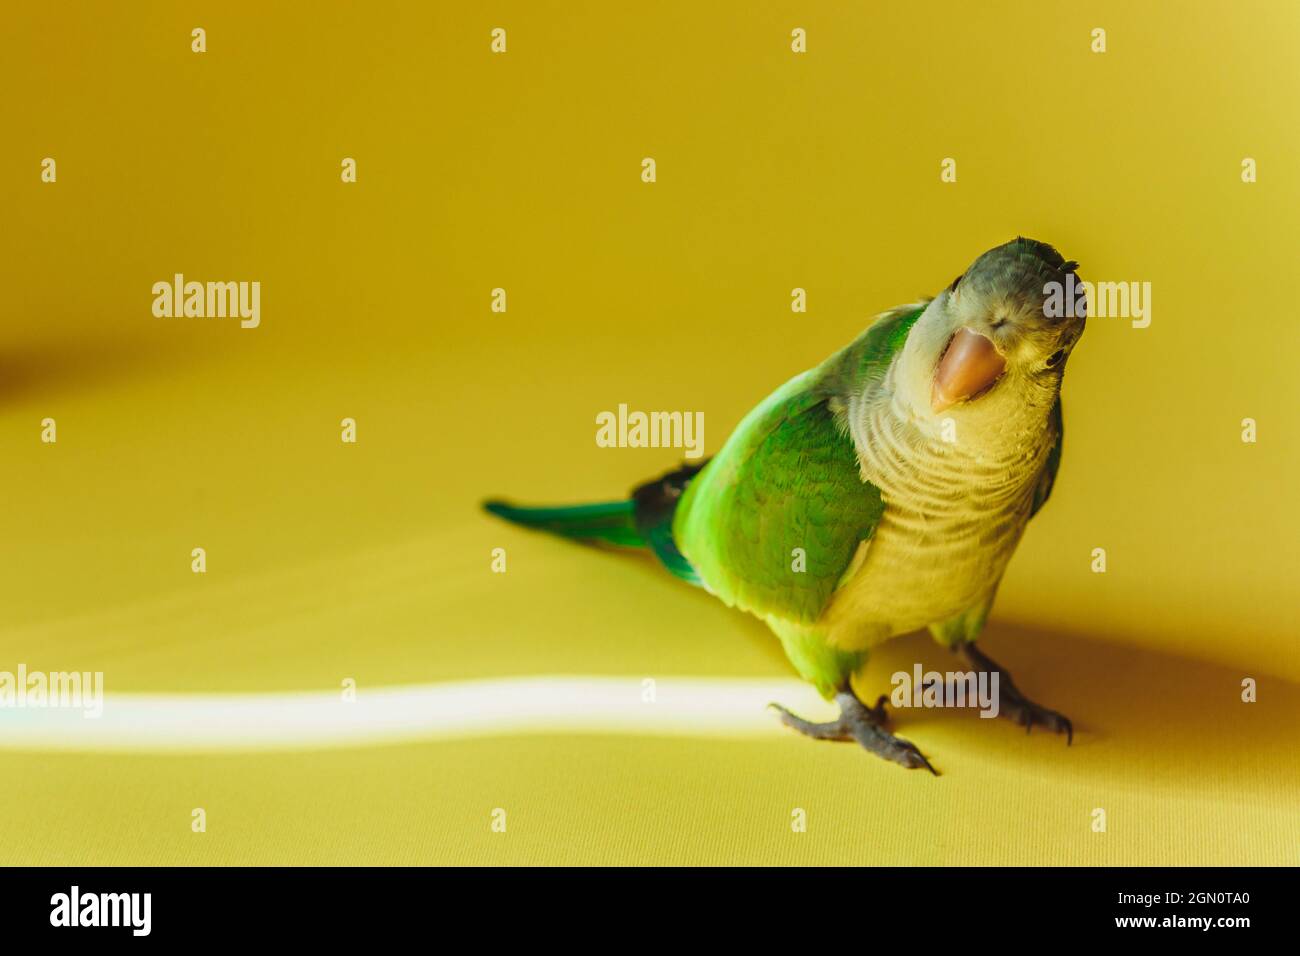 Playful green parrot looks at the camera on a yellow background. Stock Photo